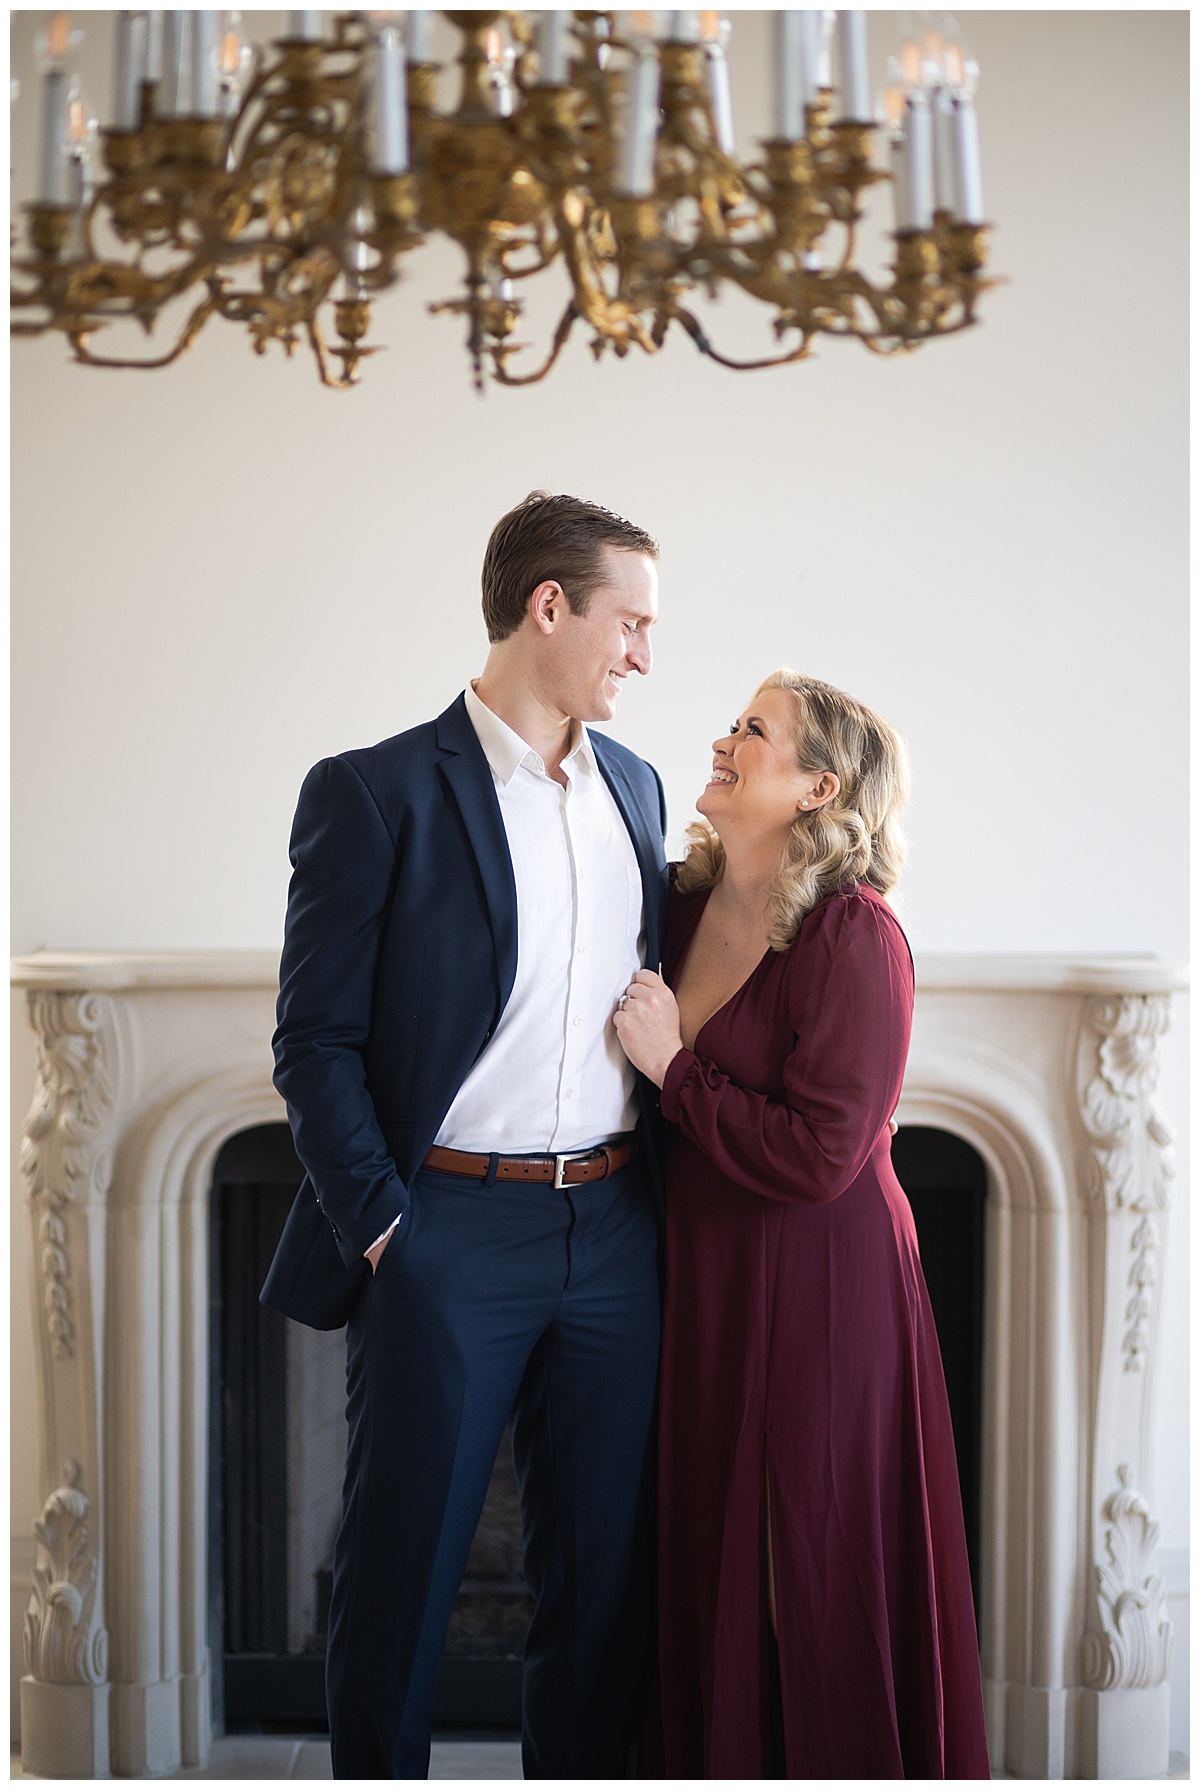 Lady looks at man for their Modern Romantic Engagement Session